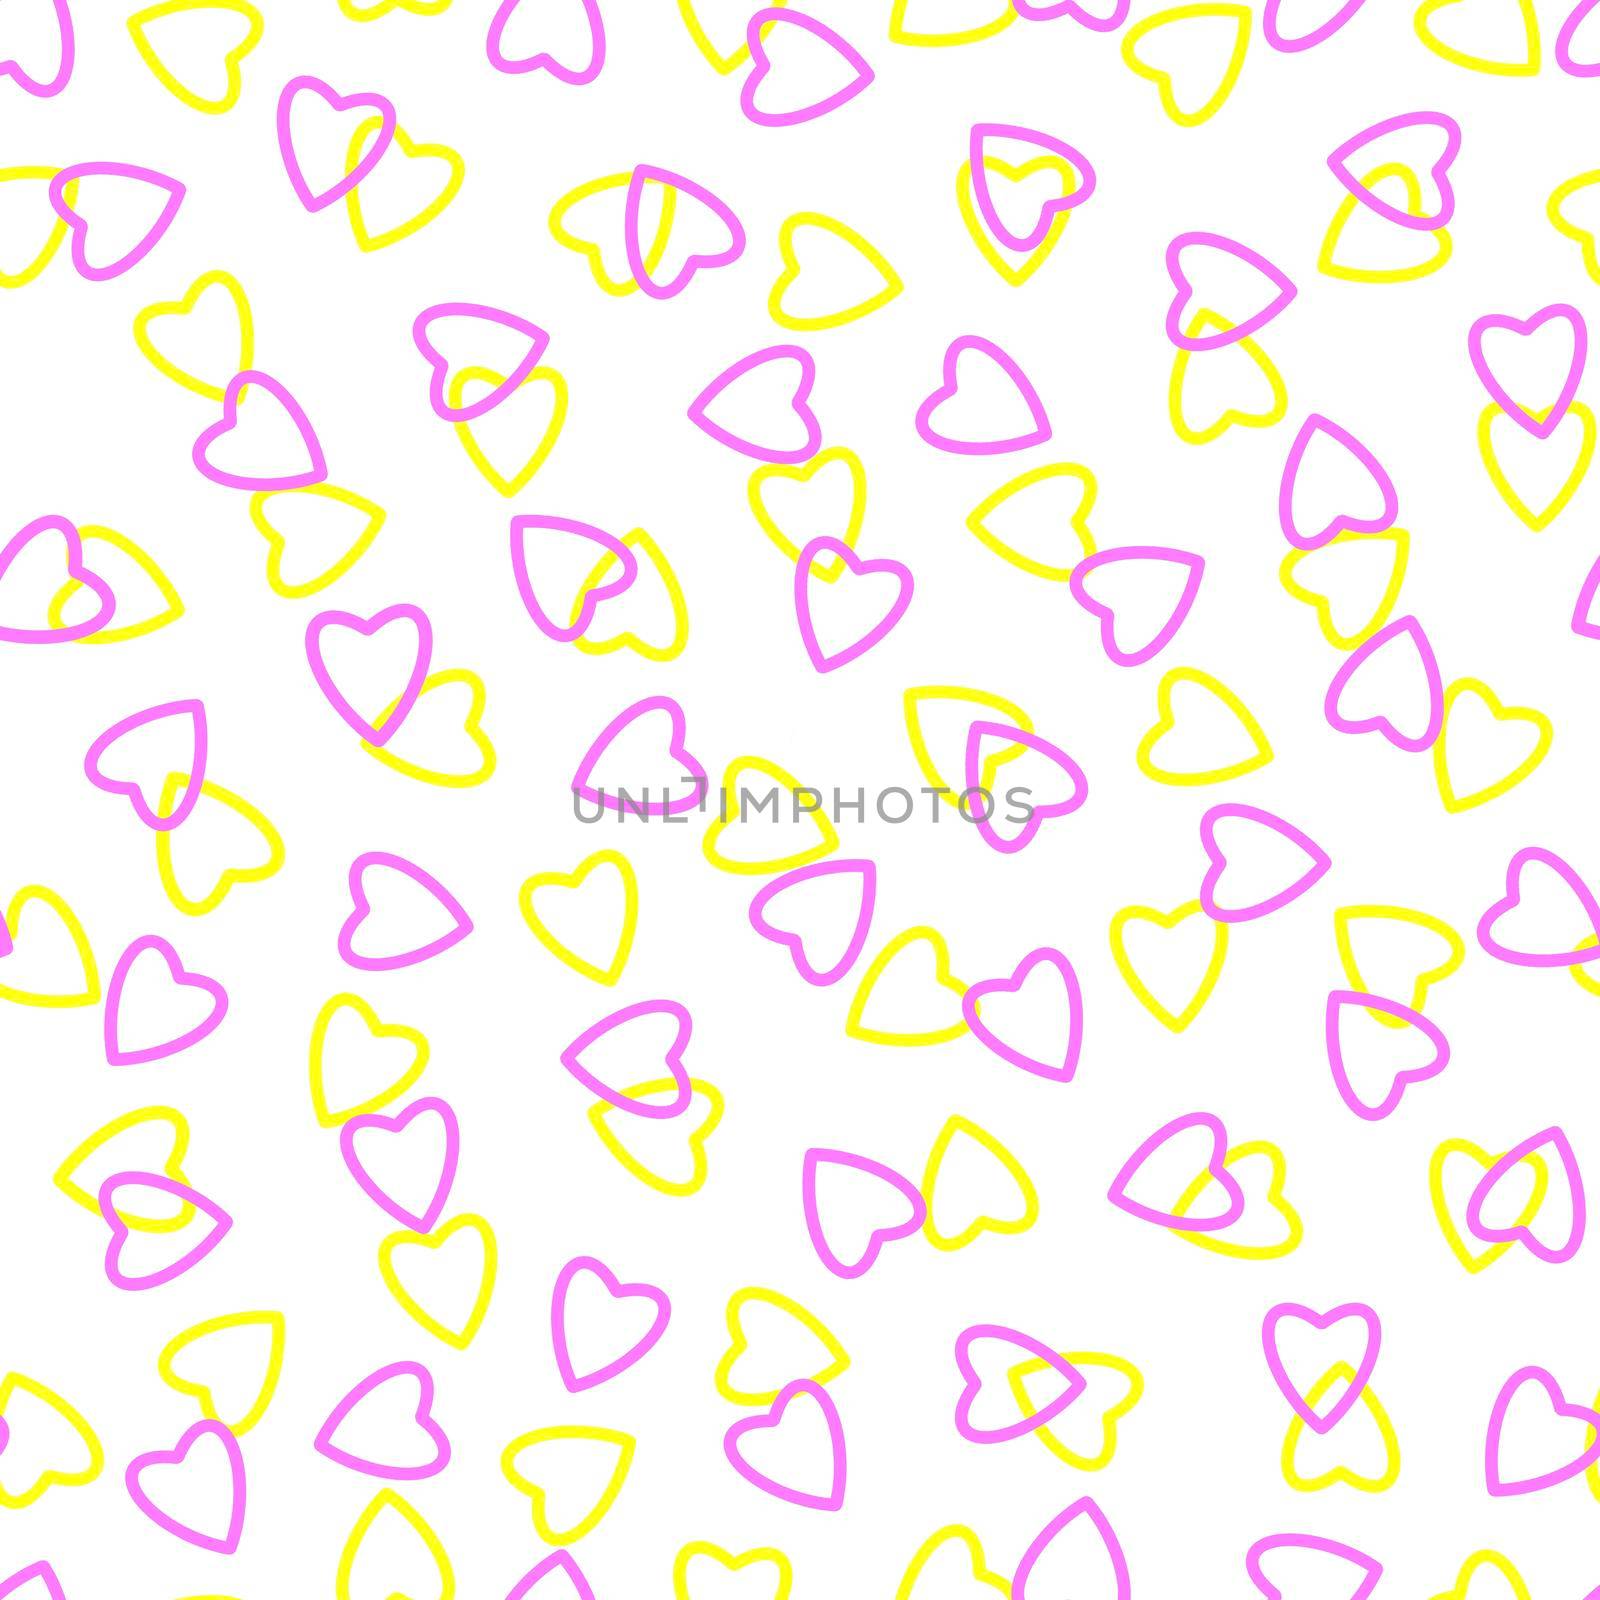 Simple heart seamless pattern,endless chaotic texture made of tiny heart silhouettes.Valentines,mothers day background.Great for Easter,wedding,scrapbook,gift wrapping paper,textiles.Pink,yellow,white by Angelsmoon